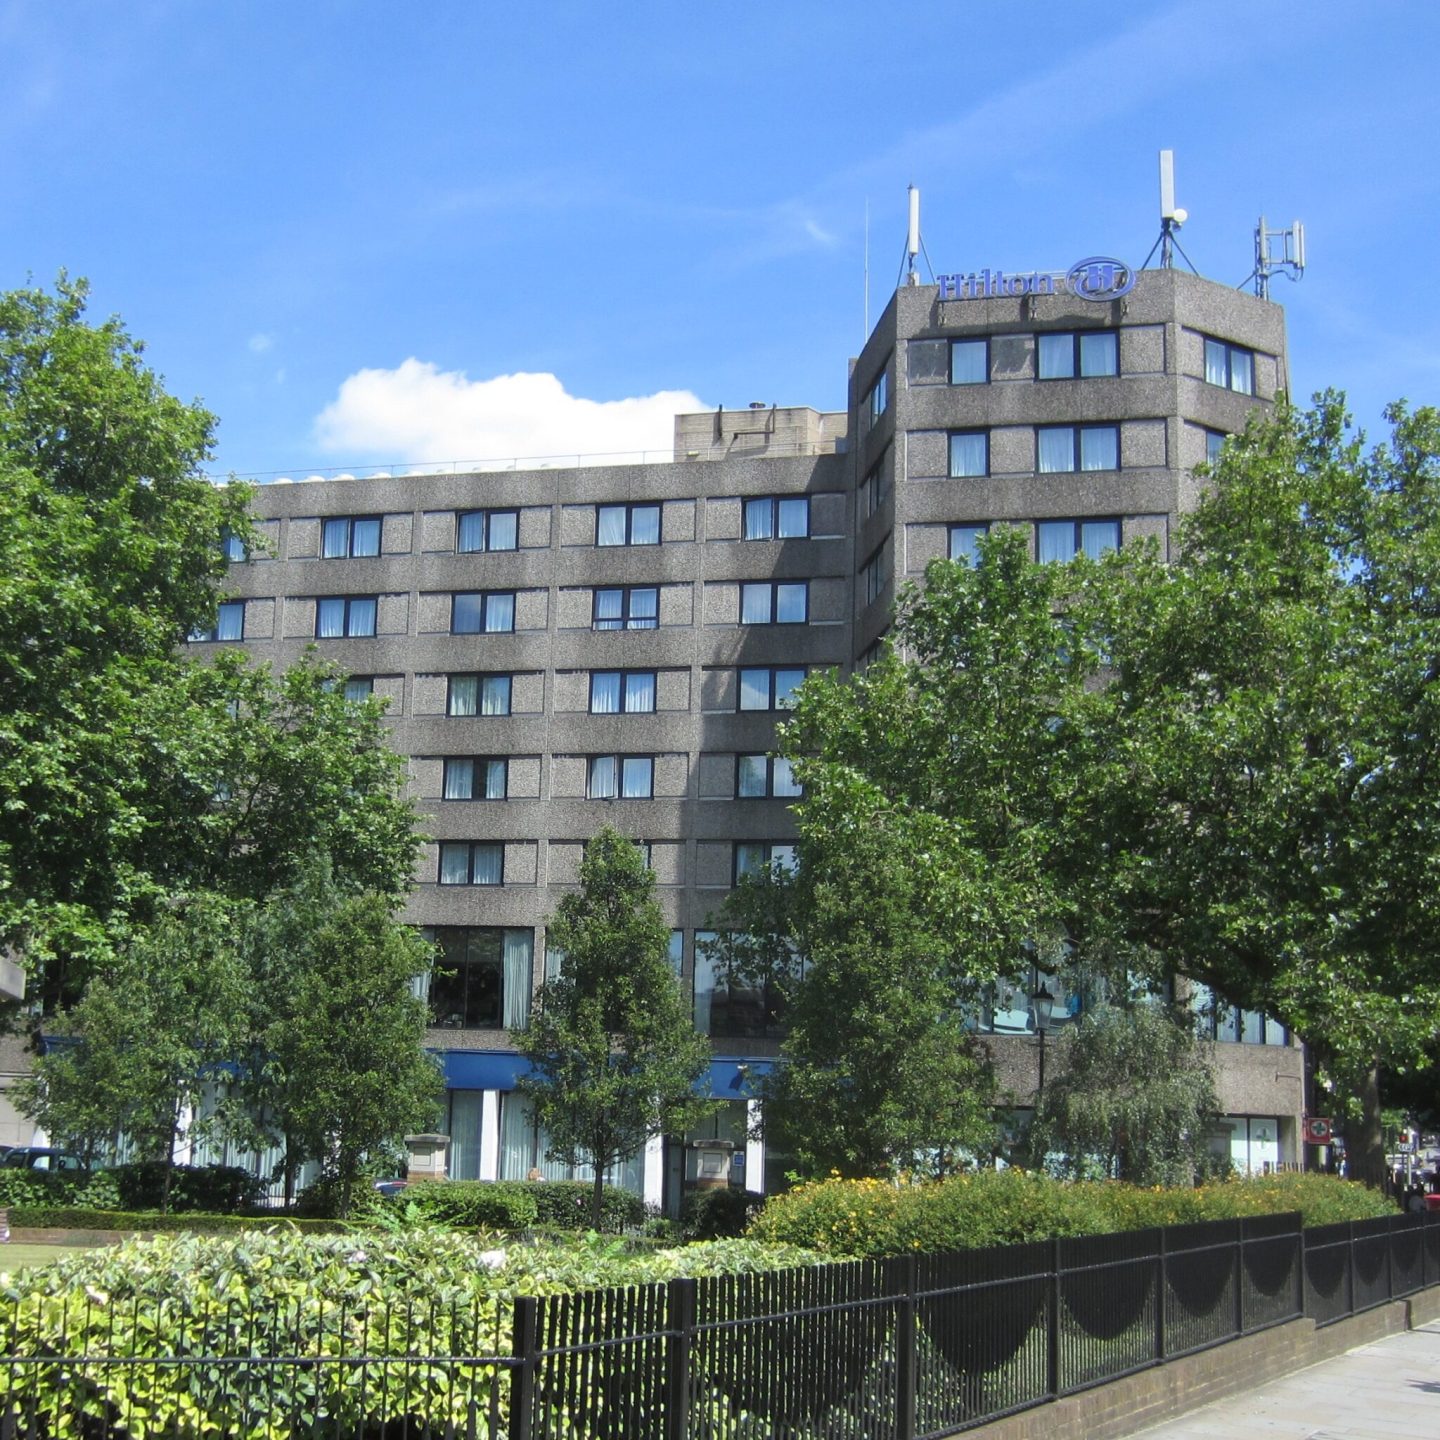 Fire Protection of Hilton London Olympia by Gunfire